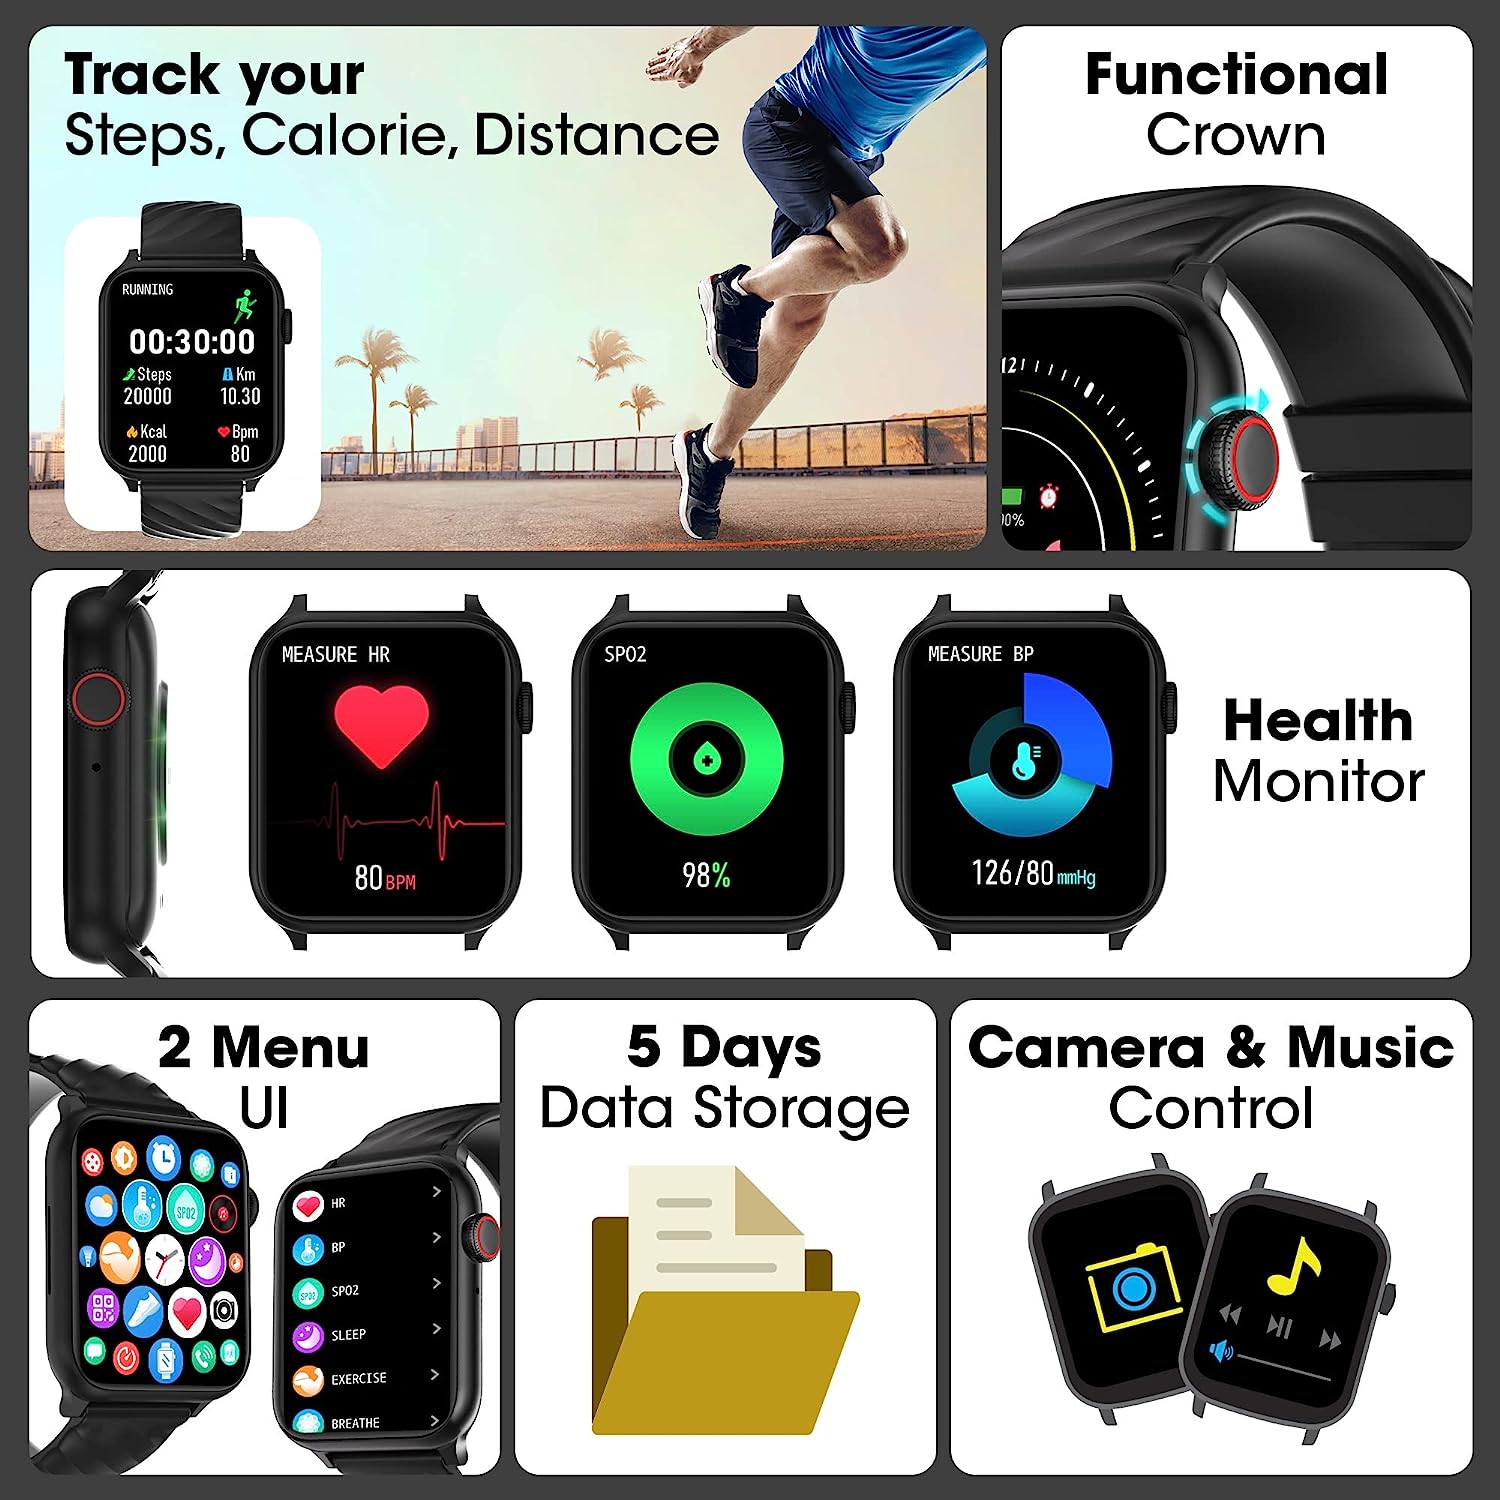 ZEBRONICS Iconic LITE AMOLED Smartwatch with Bluetooth Calling, 100+ Sport Modes, IP67, 1.78" 2.5D Curved Display, Voice Assistant, 10 Built-in / Customizable Watch Faces and Sleep Monitor (Black)